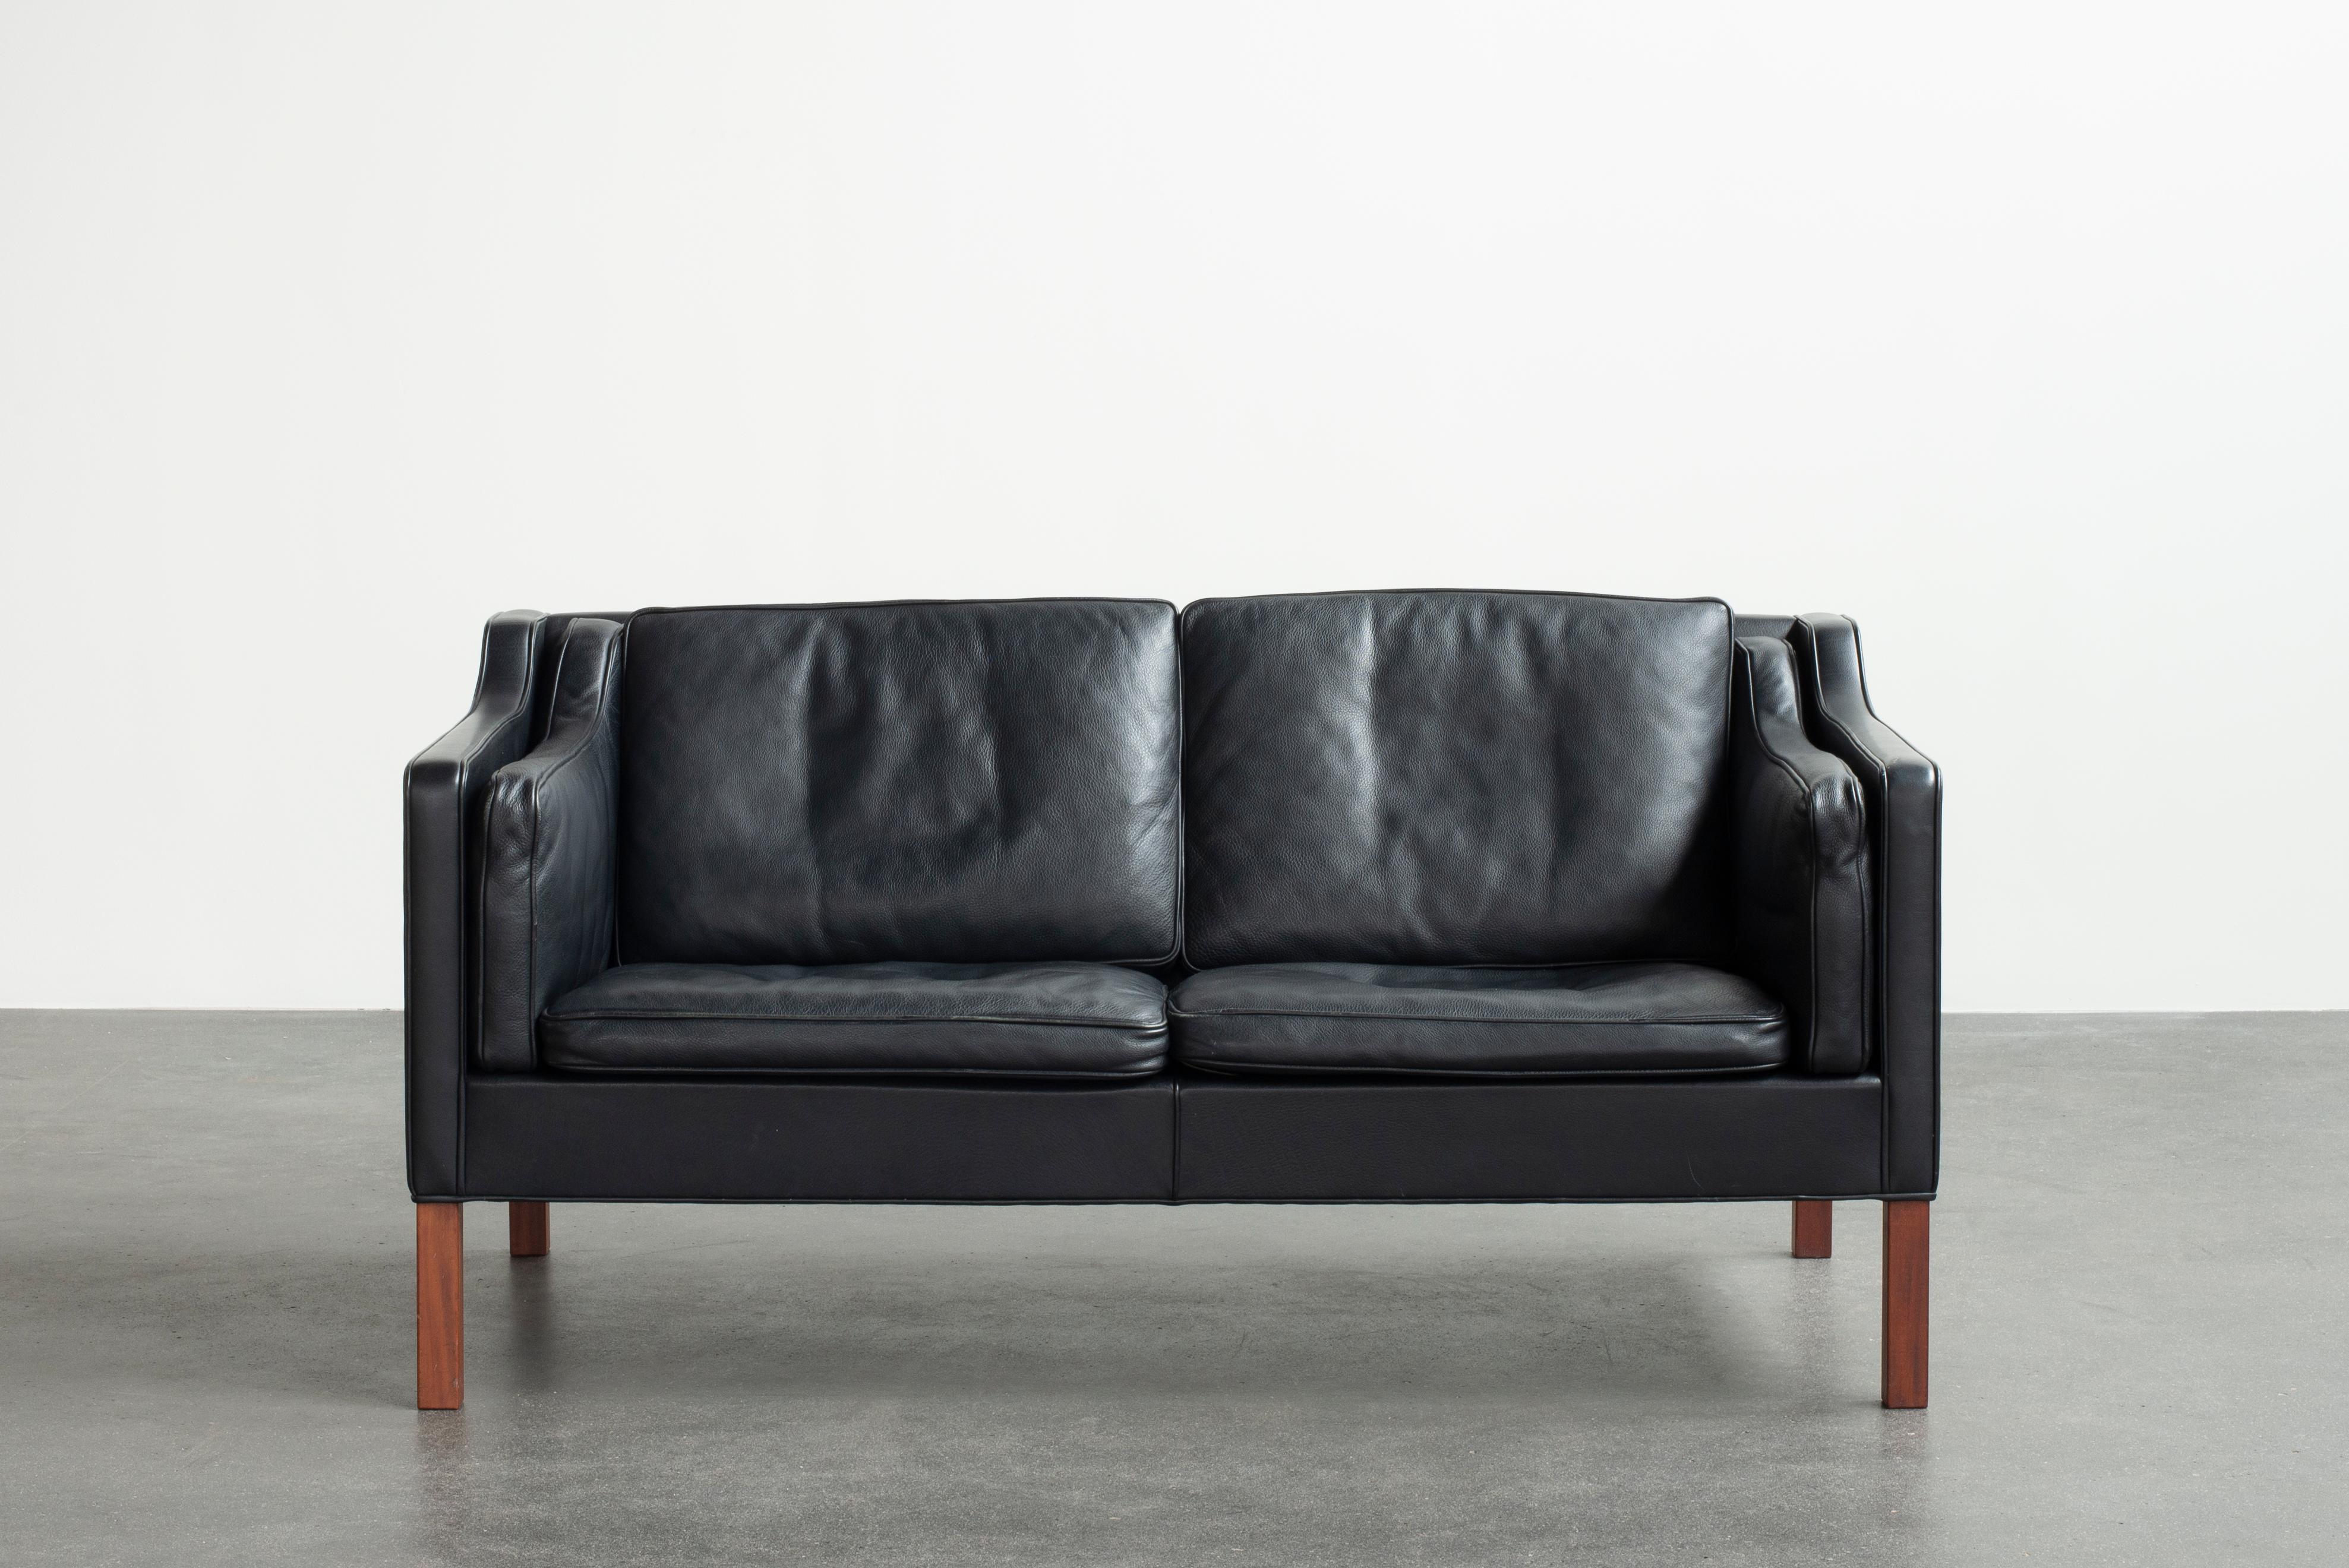 Børge Mogensen freestanding two seater sofa mounted on Mahogany legs. Sides, back and loose cushions upholstered with black leather. Manufactured by Fredericia Furniture in 1985.